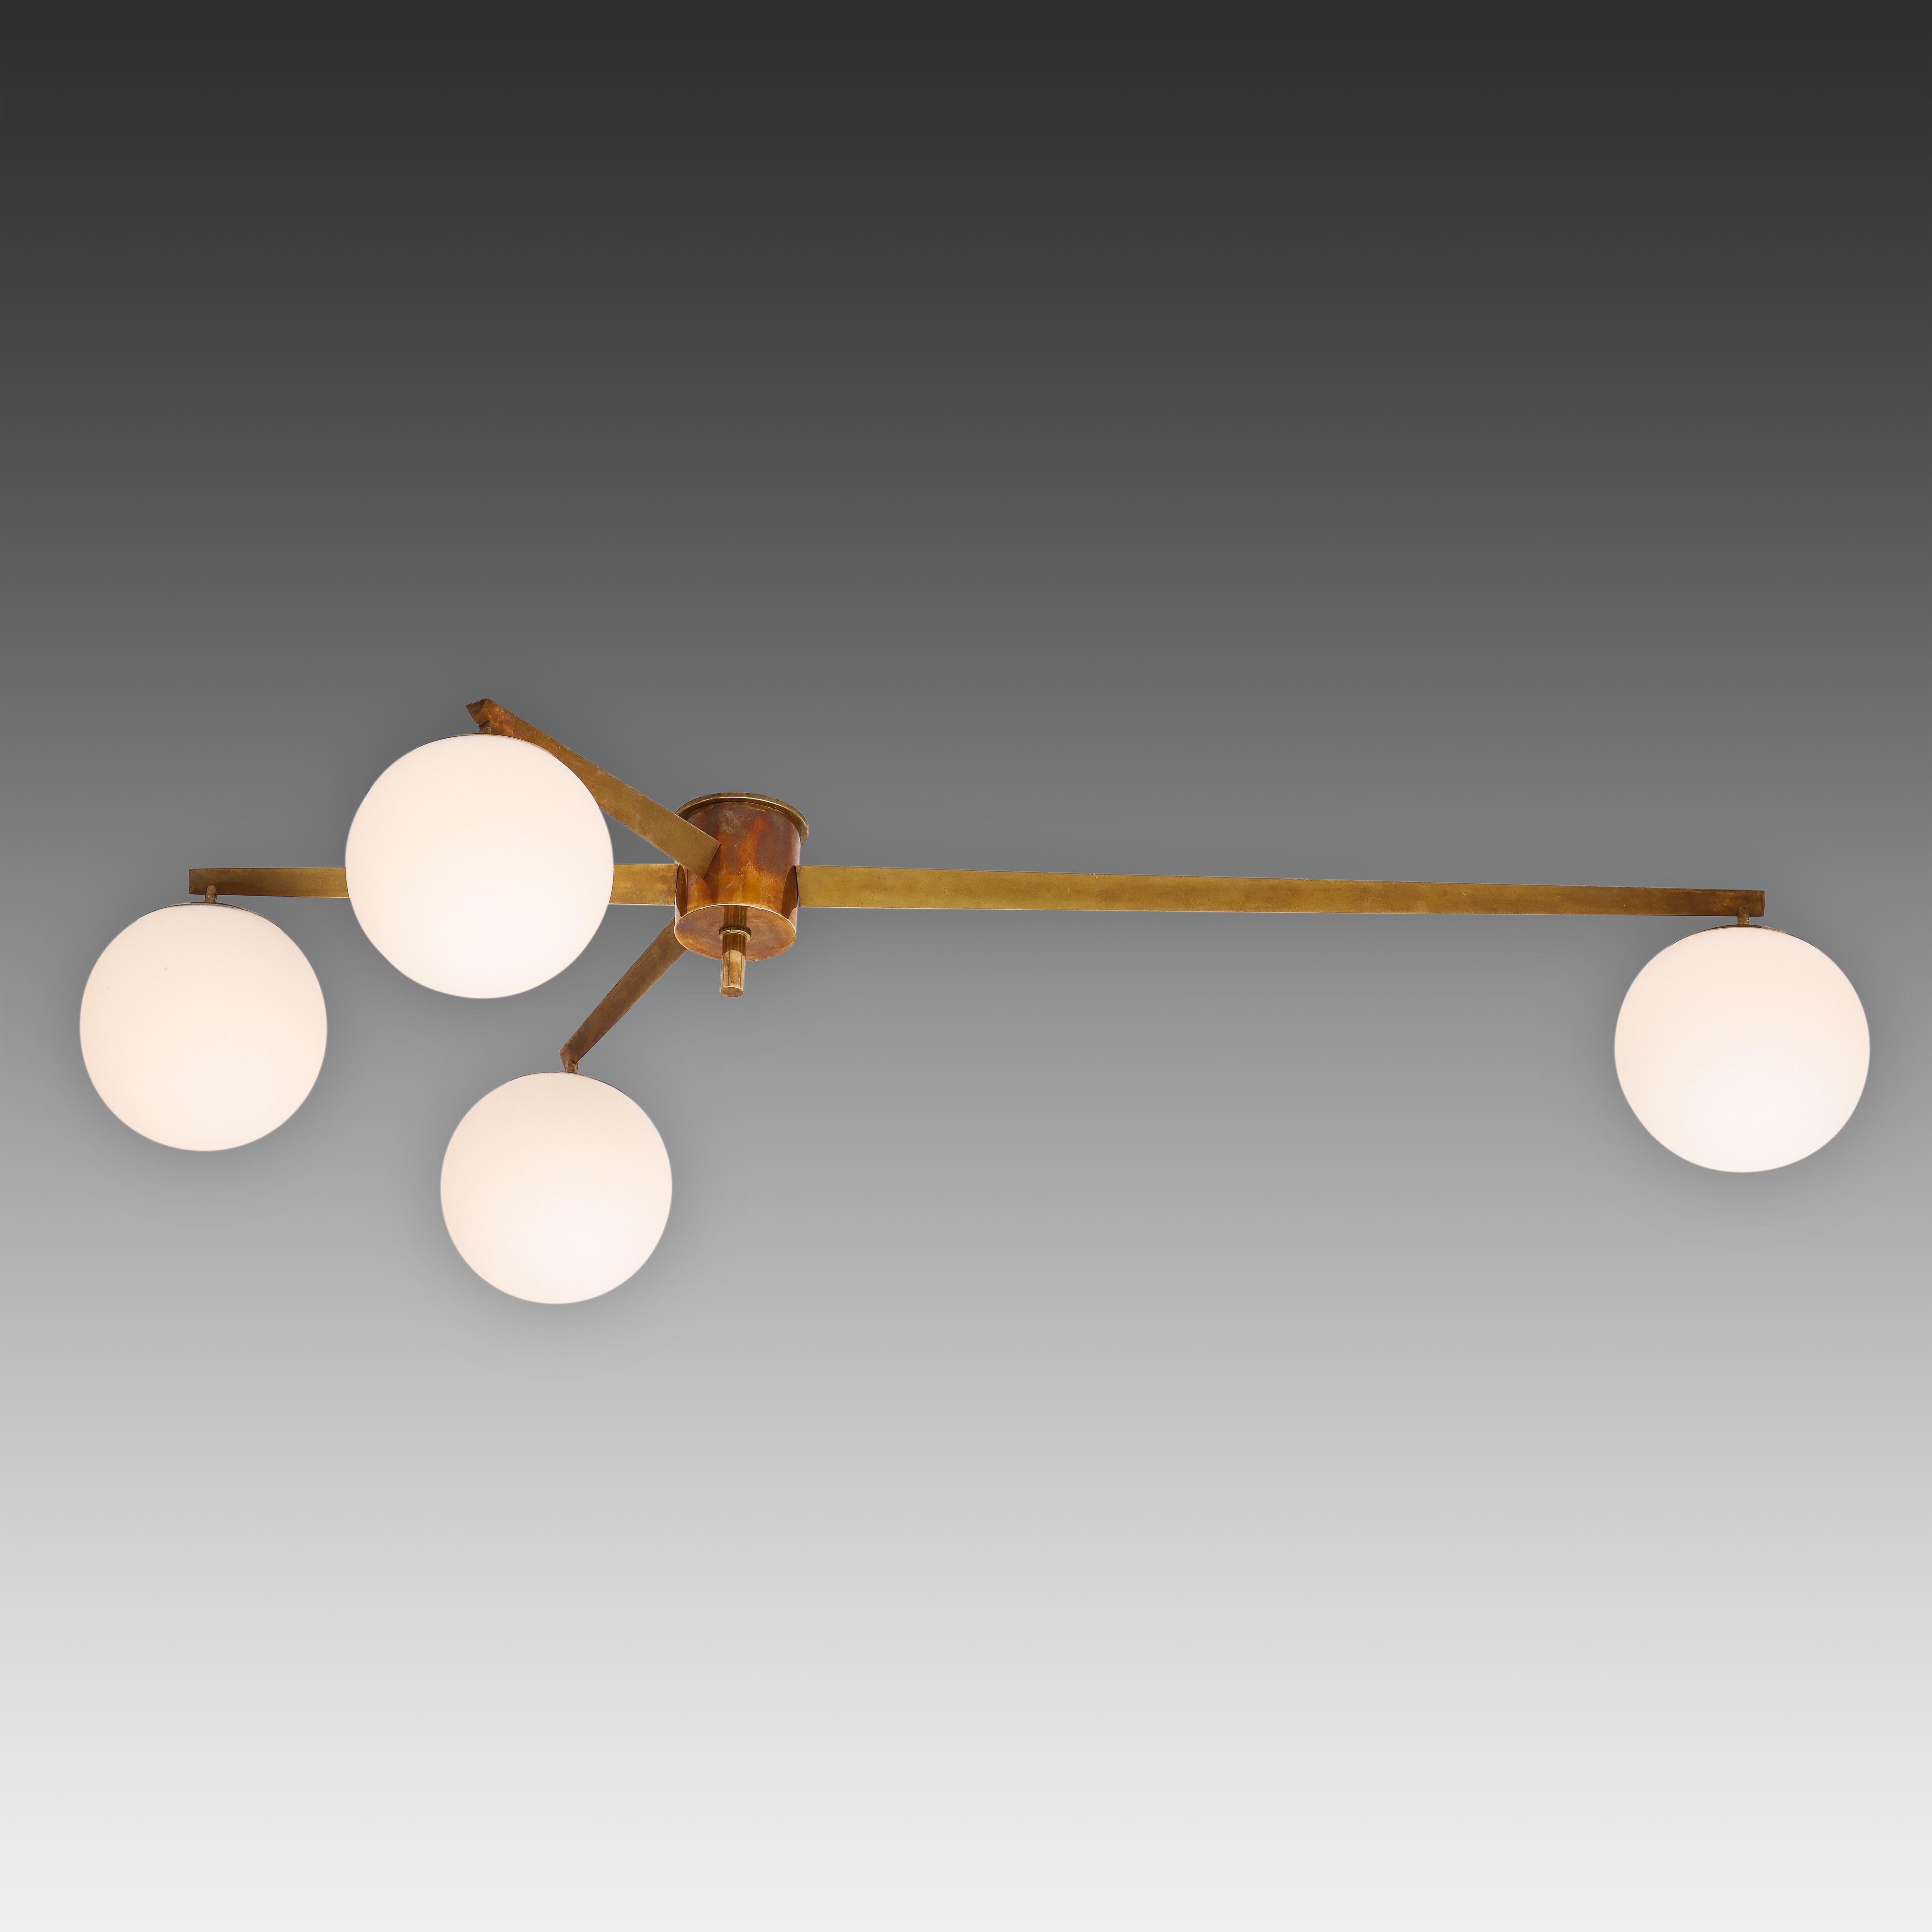 Angelo Lelli for Arredoluce original striking Stella 4arm flush mount ceiling light or chandelier with four opaline glass globe shades suspended from rich patinated brass structure and mount. This 4 lune model is more rare than the 6-arm and 3-arm